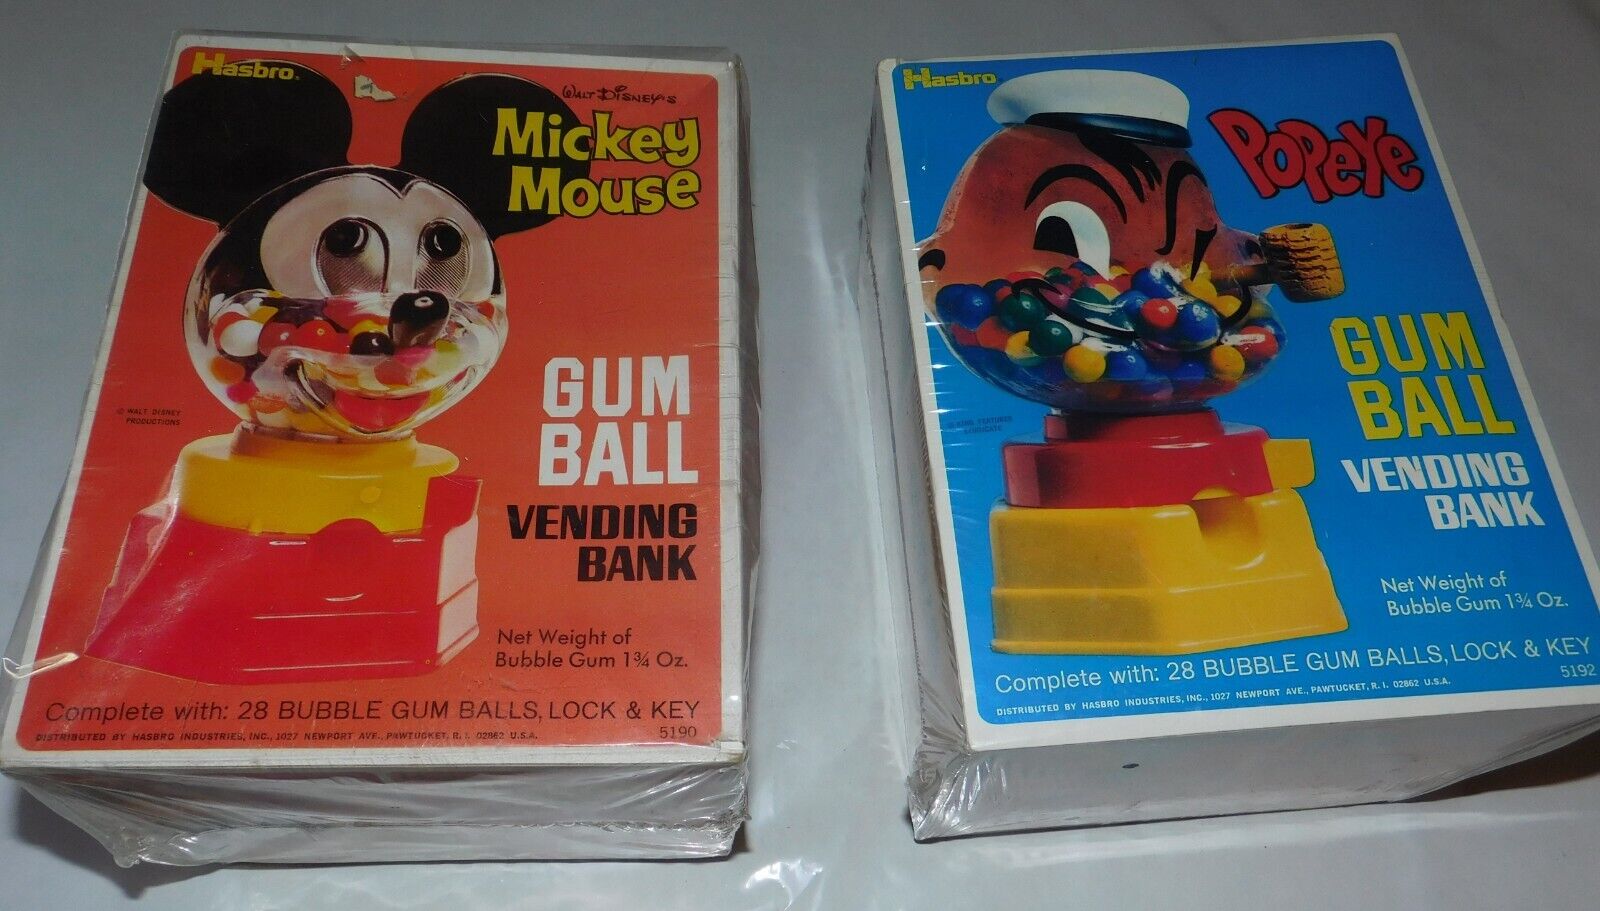 POPEYE AND MICKEY MOUSE, UNUSED, MINT HASBRO GUMBALL MACHINES- MINT BOXES